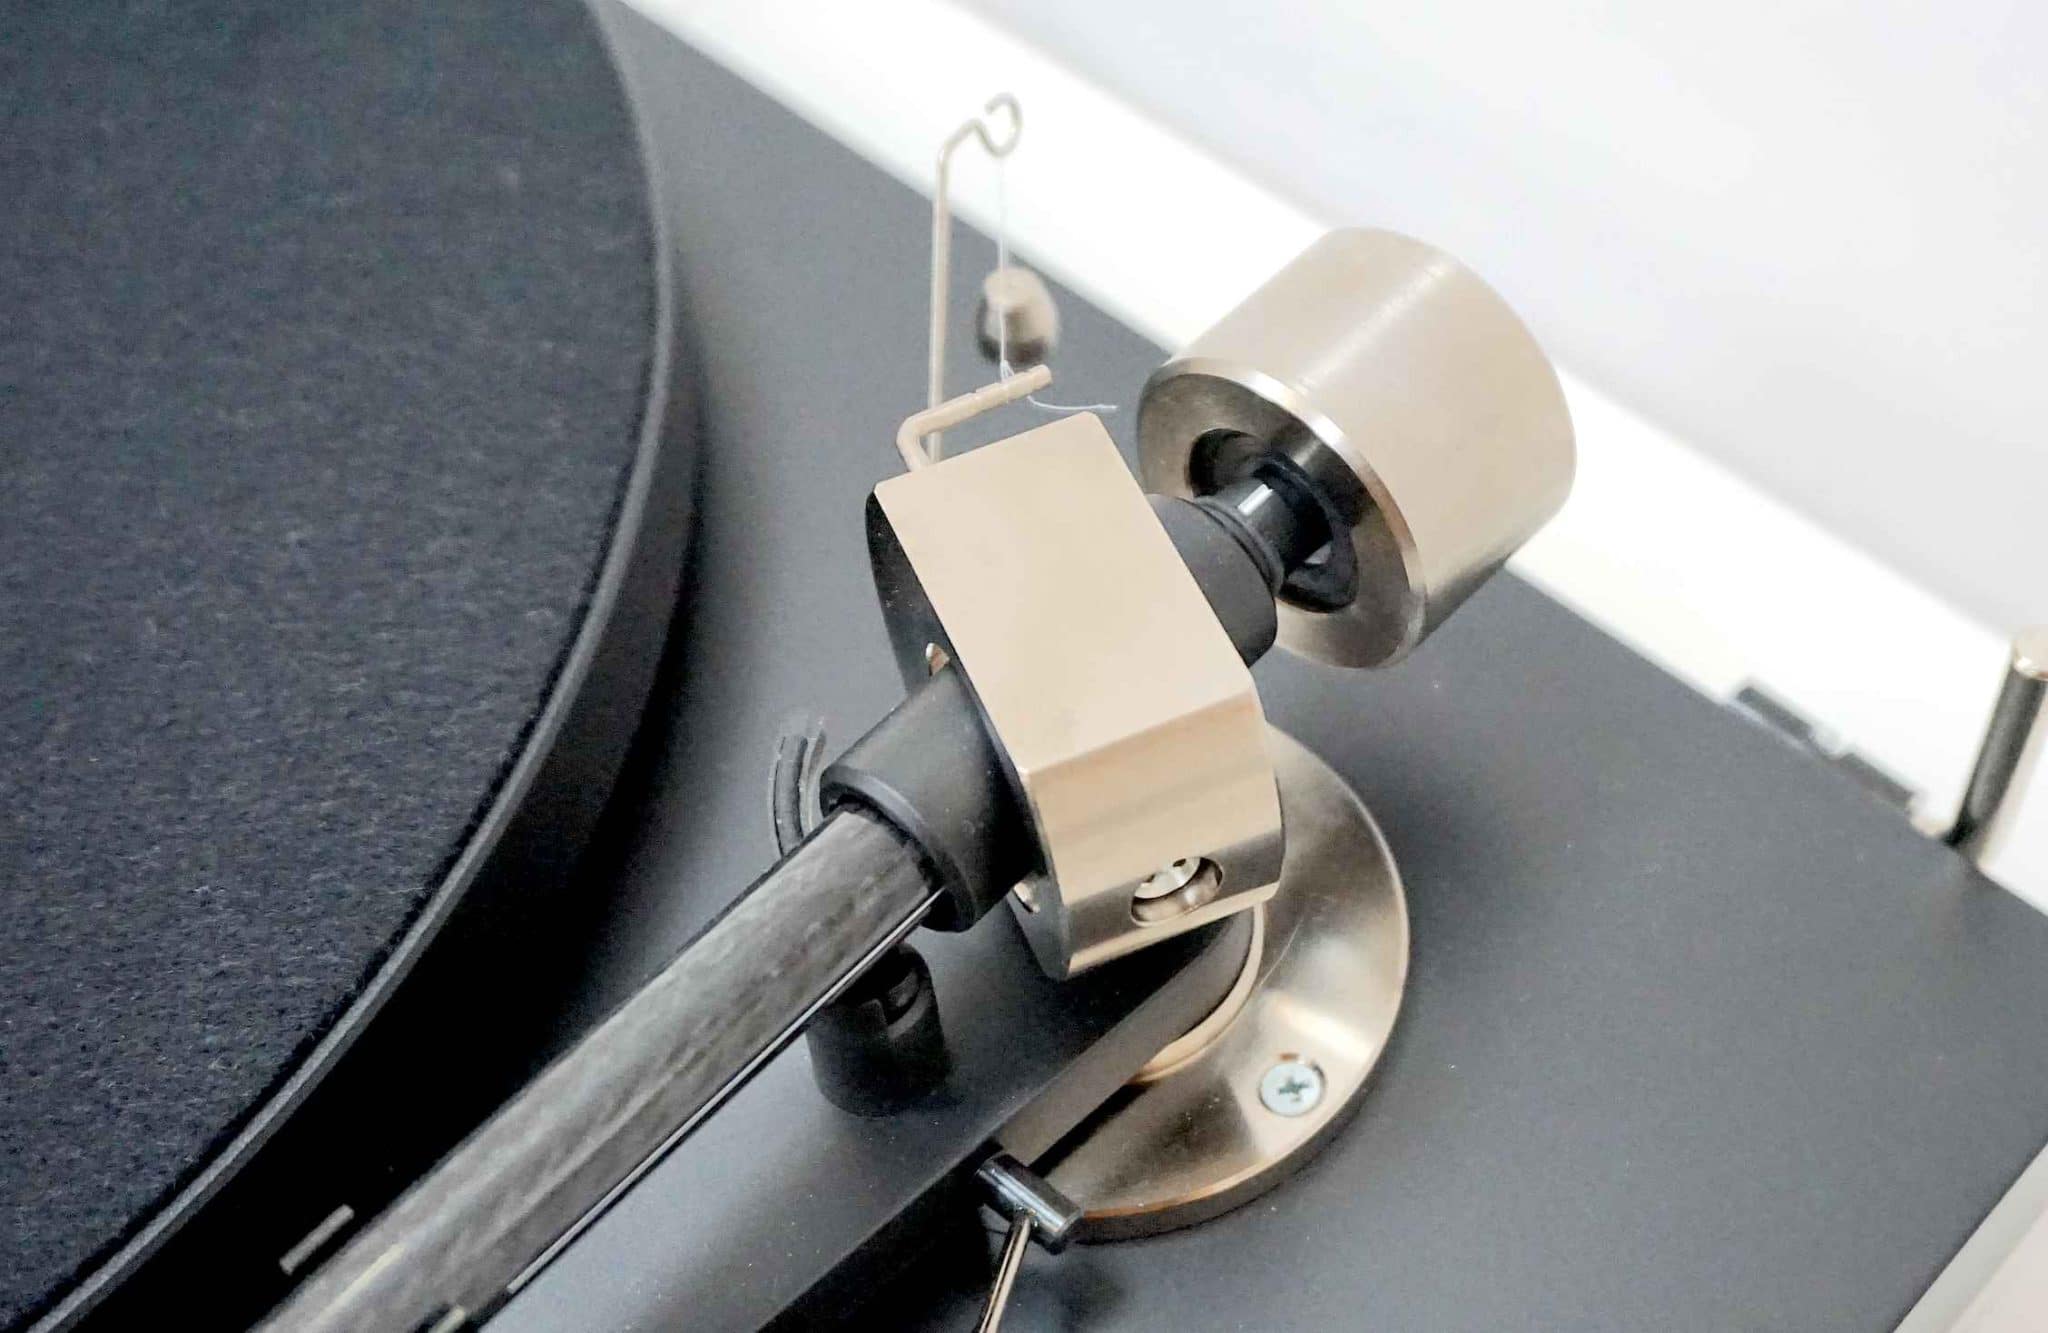 DEBUT PRO TURNTABLE FROM PRO-JECT